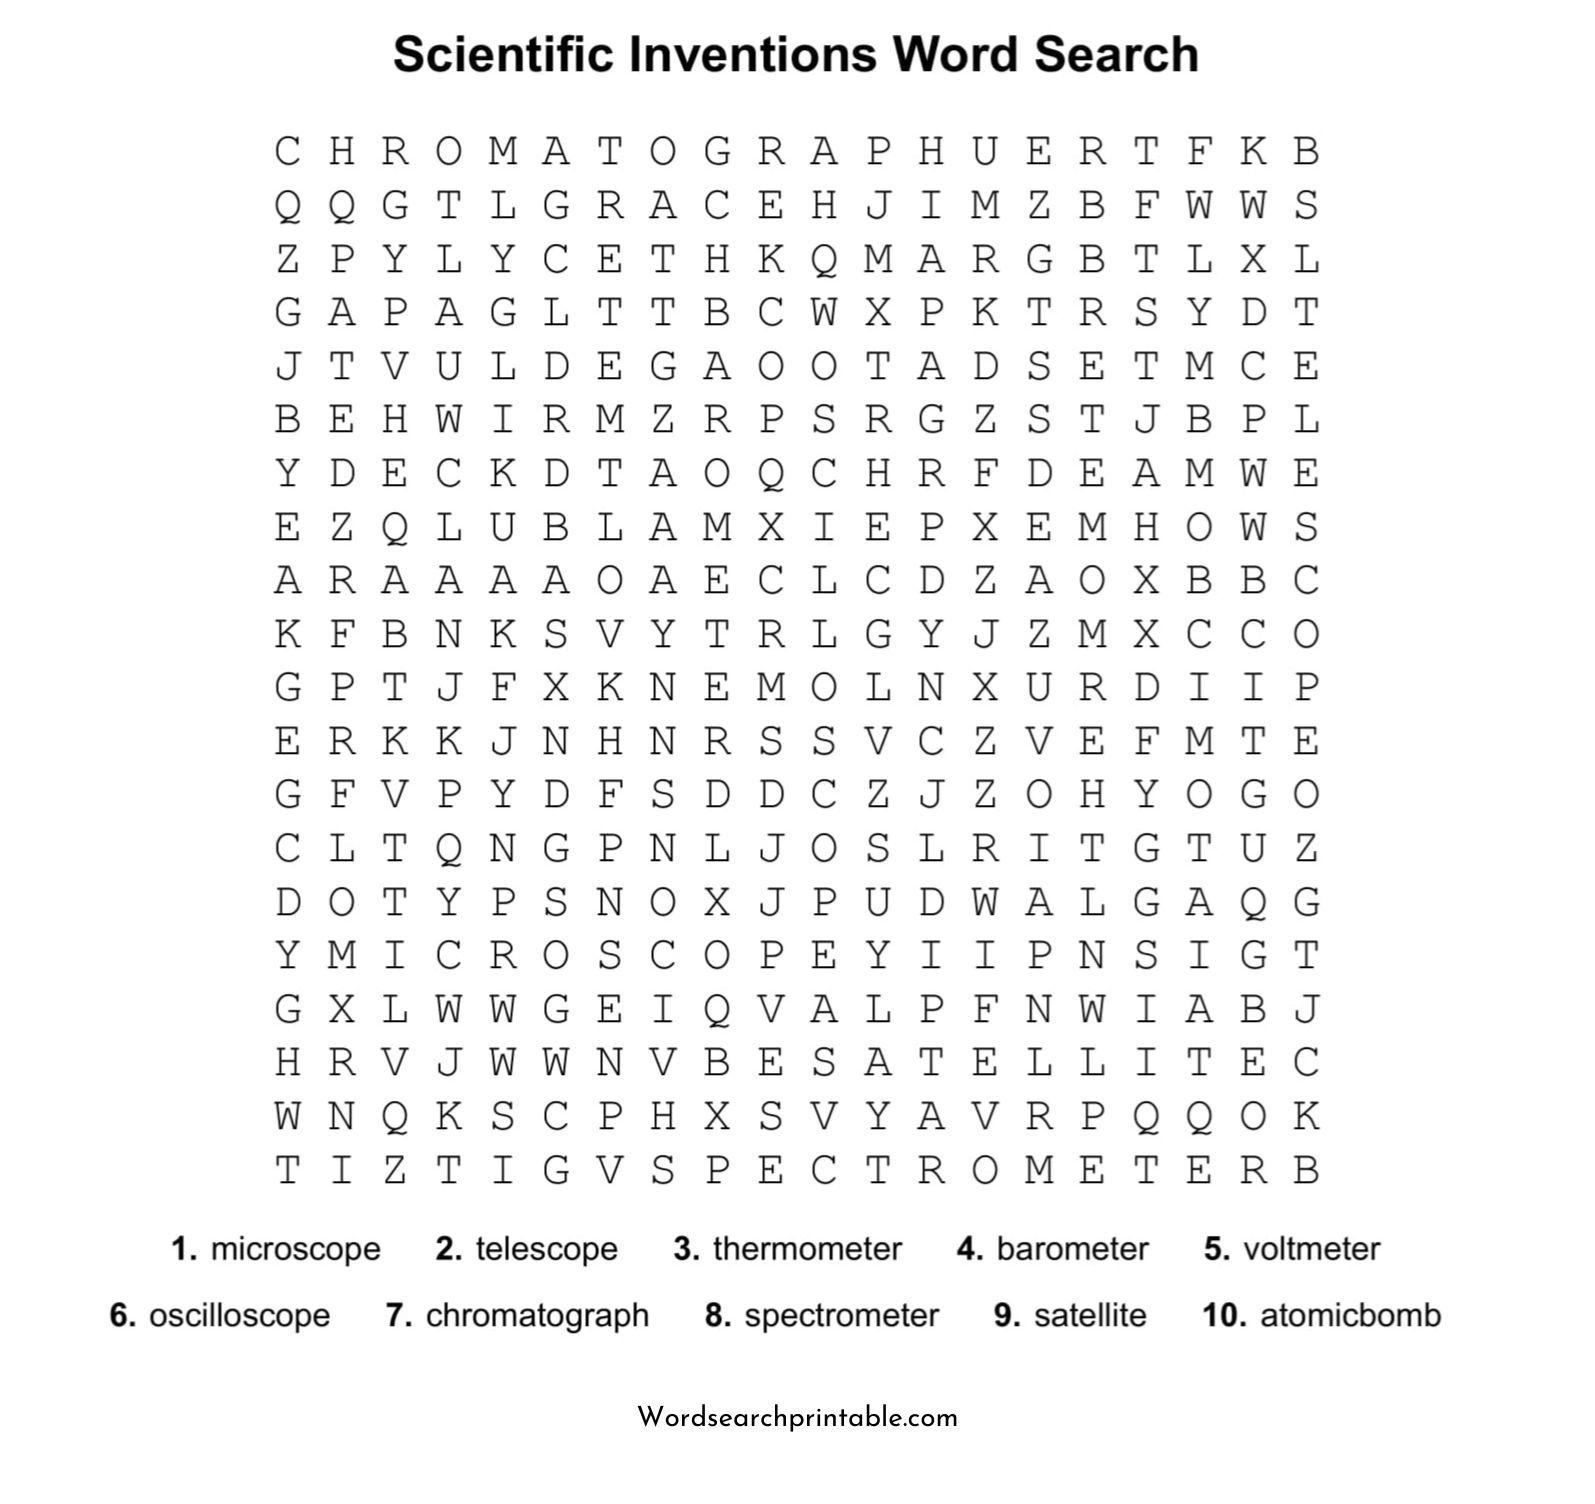 scientific inventions word search puzzle